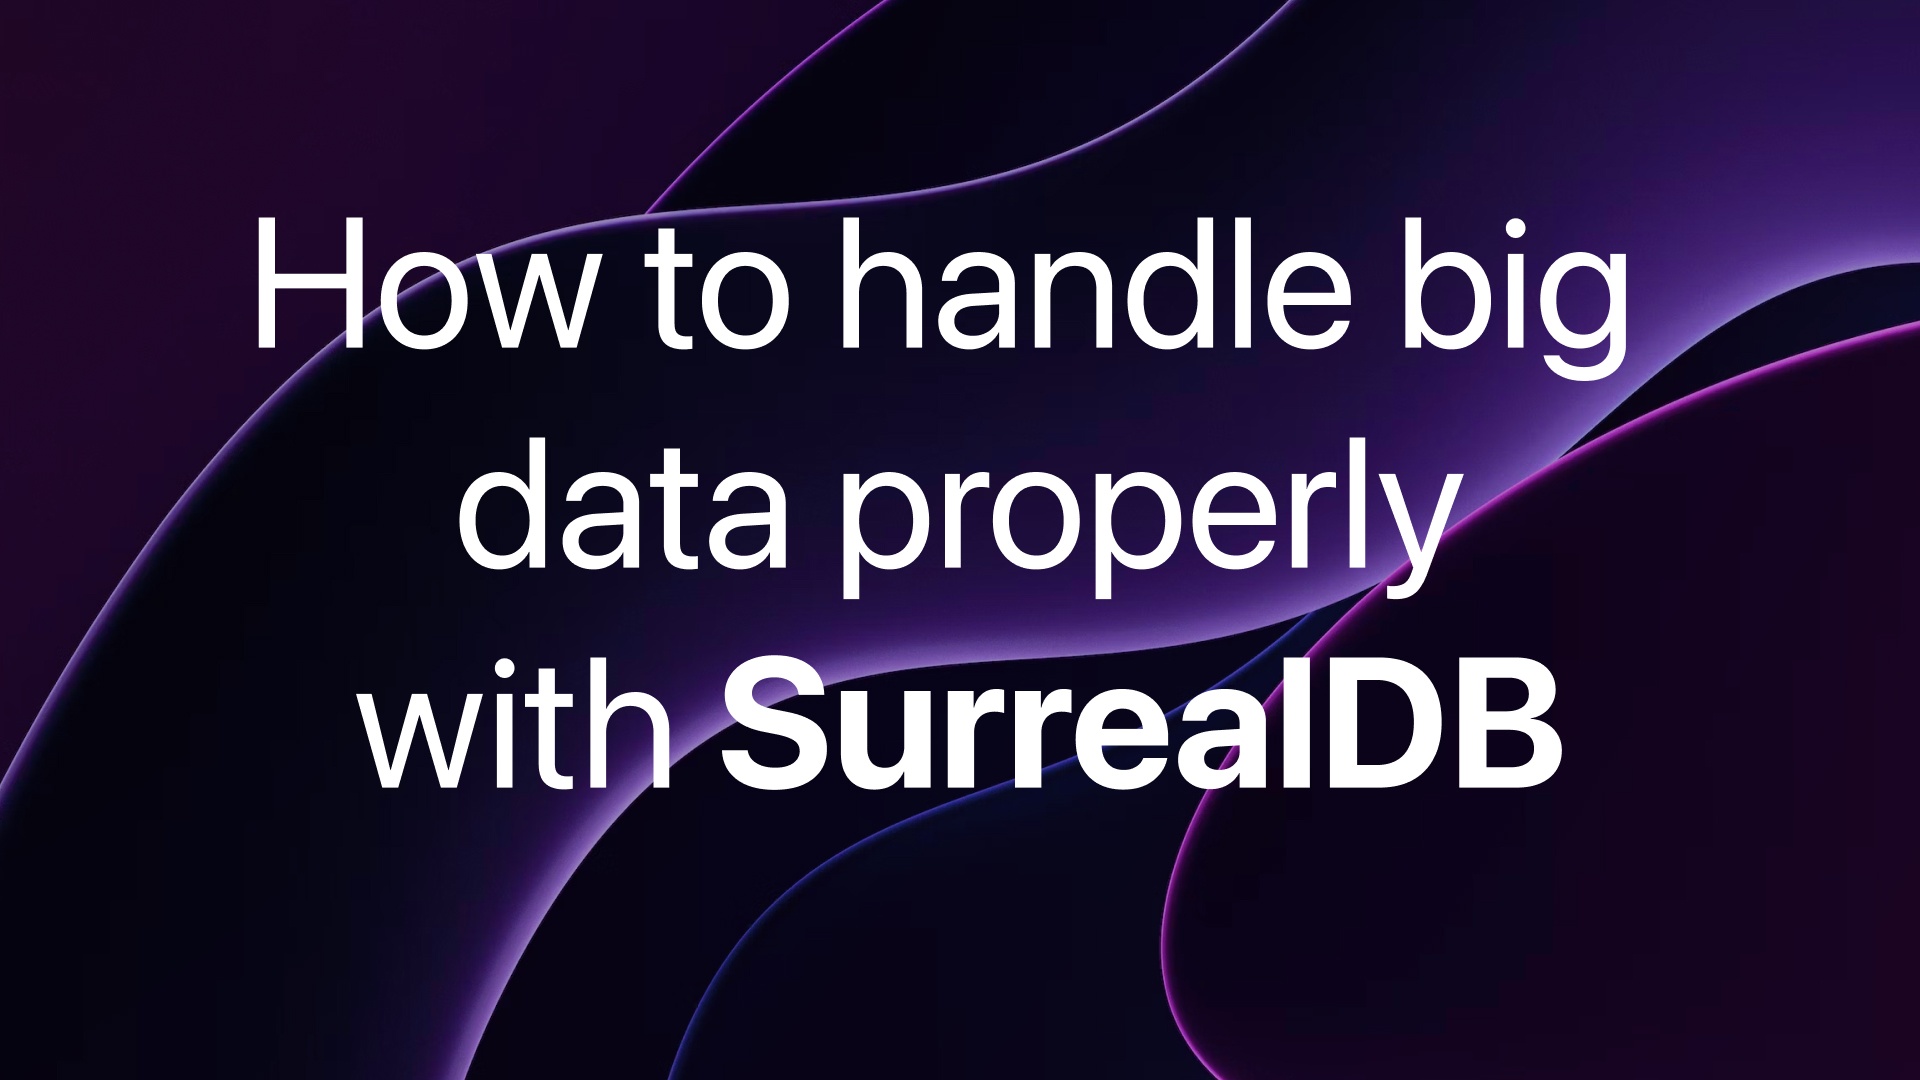 How to handle big data properly with SurrealDB